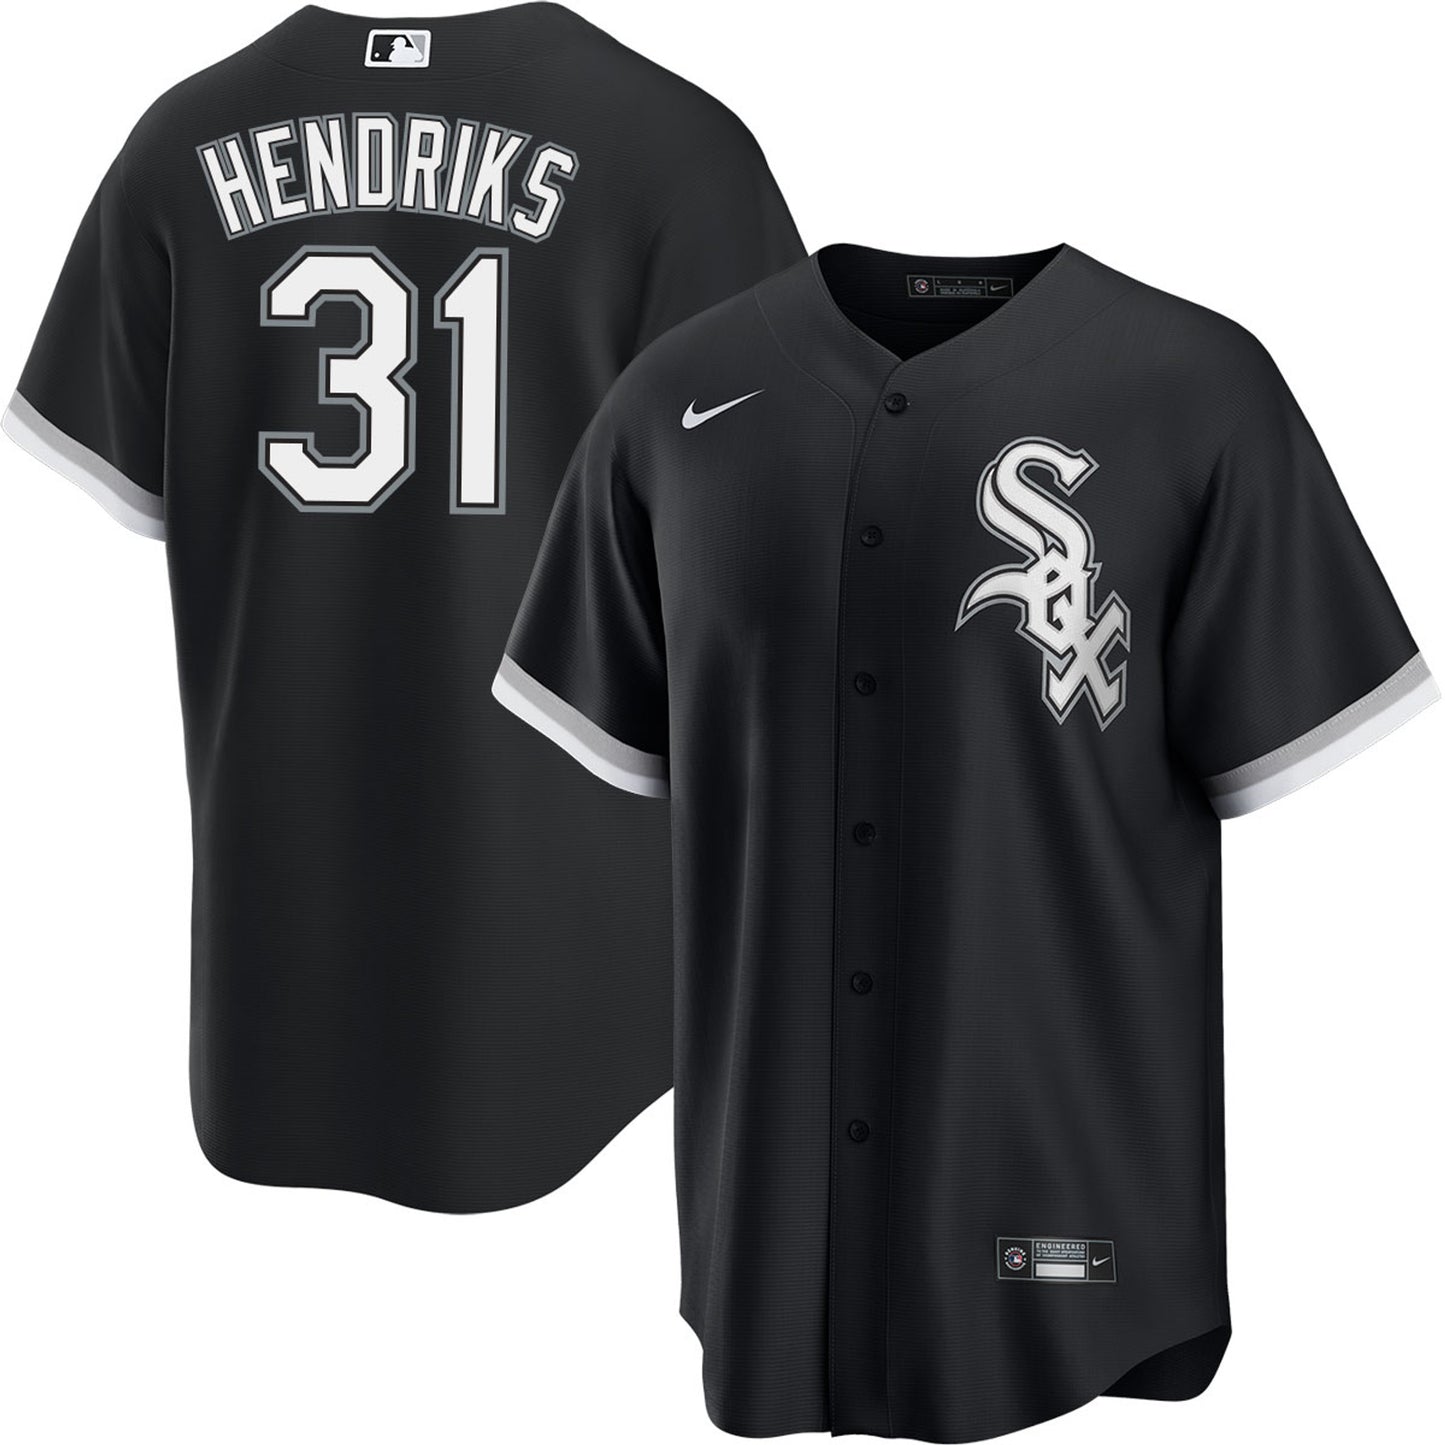 Men's Liam Hendriks Chicago White Sox Player Jersey